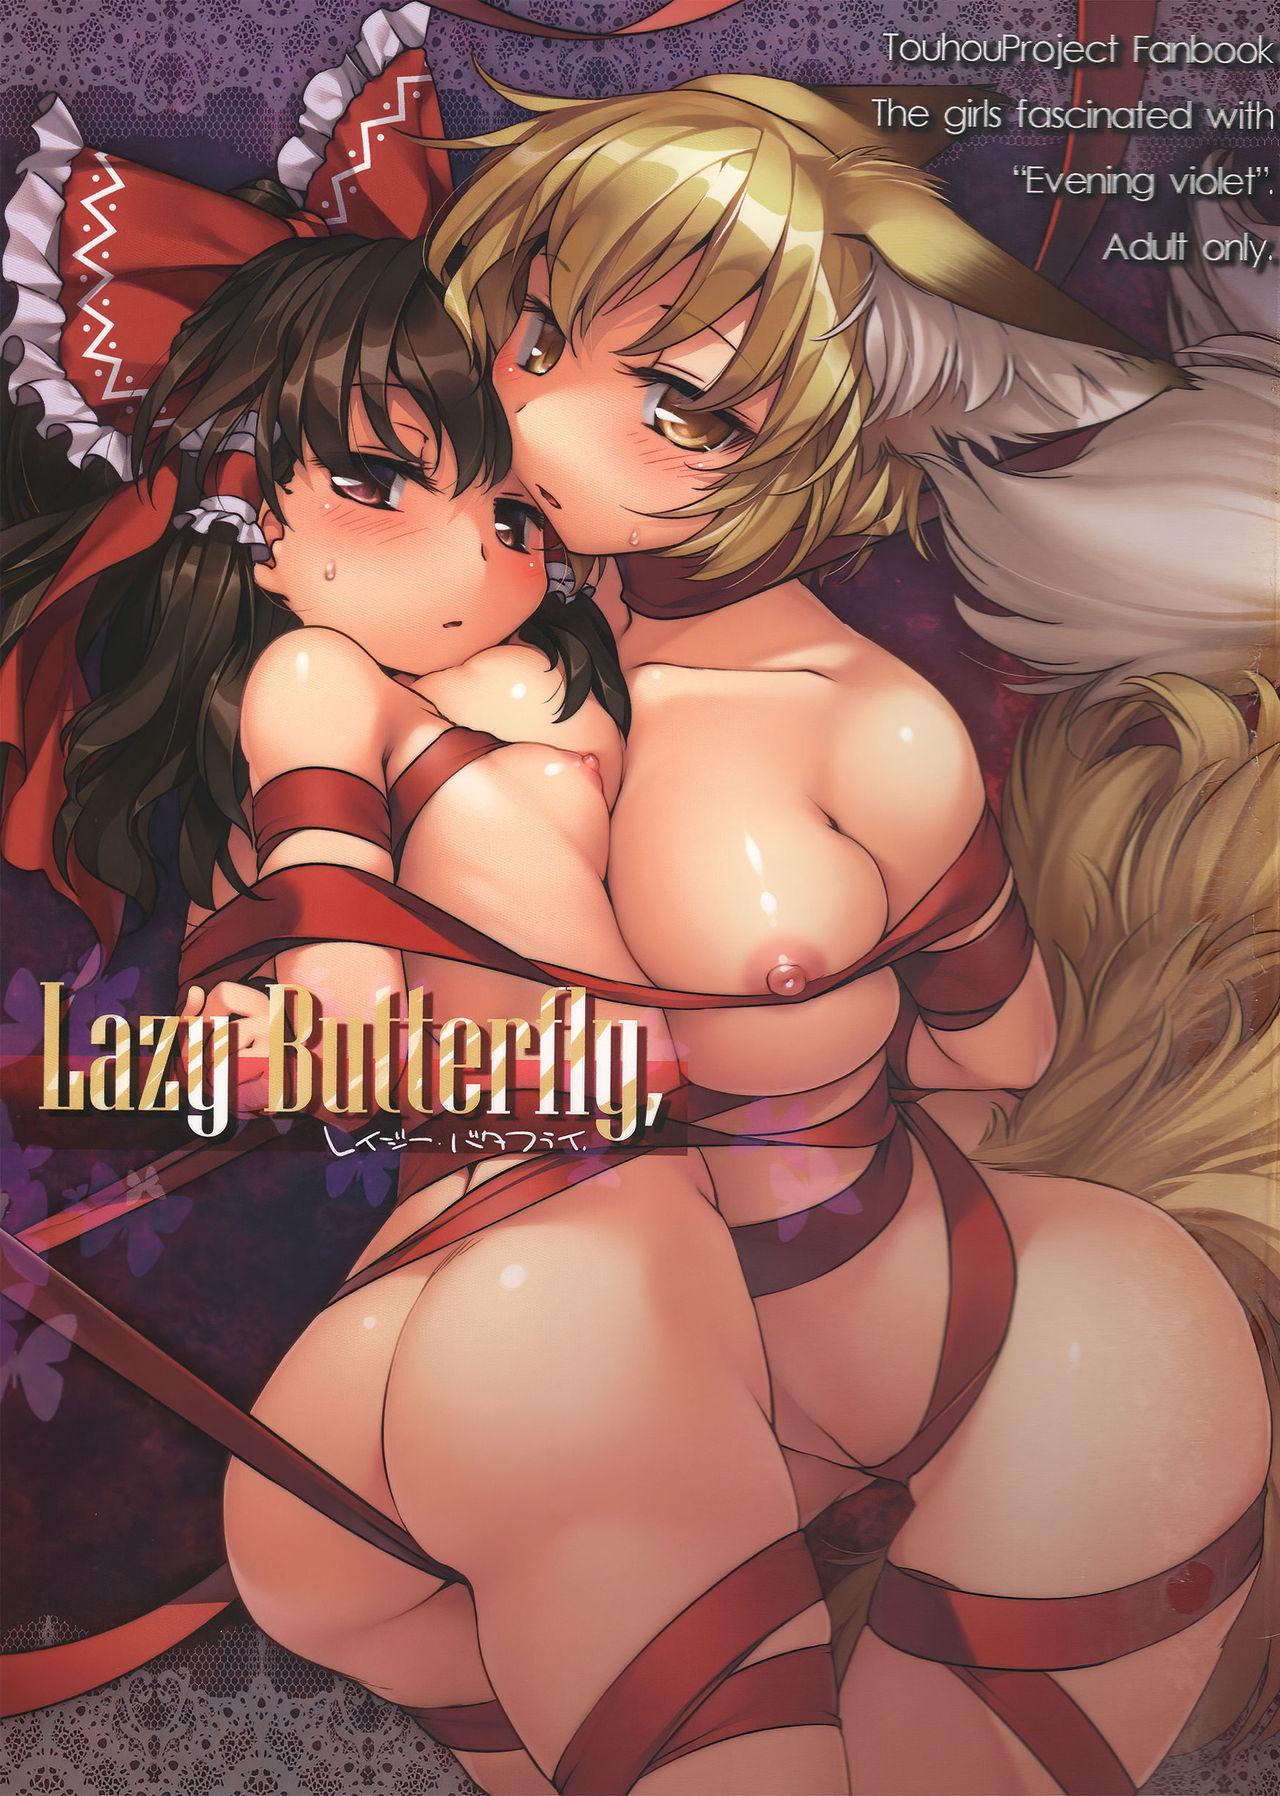 Boy Girl Lazy Butterfly - Touhou project Monster Dick - Picture 1